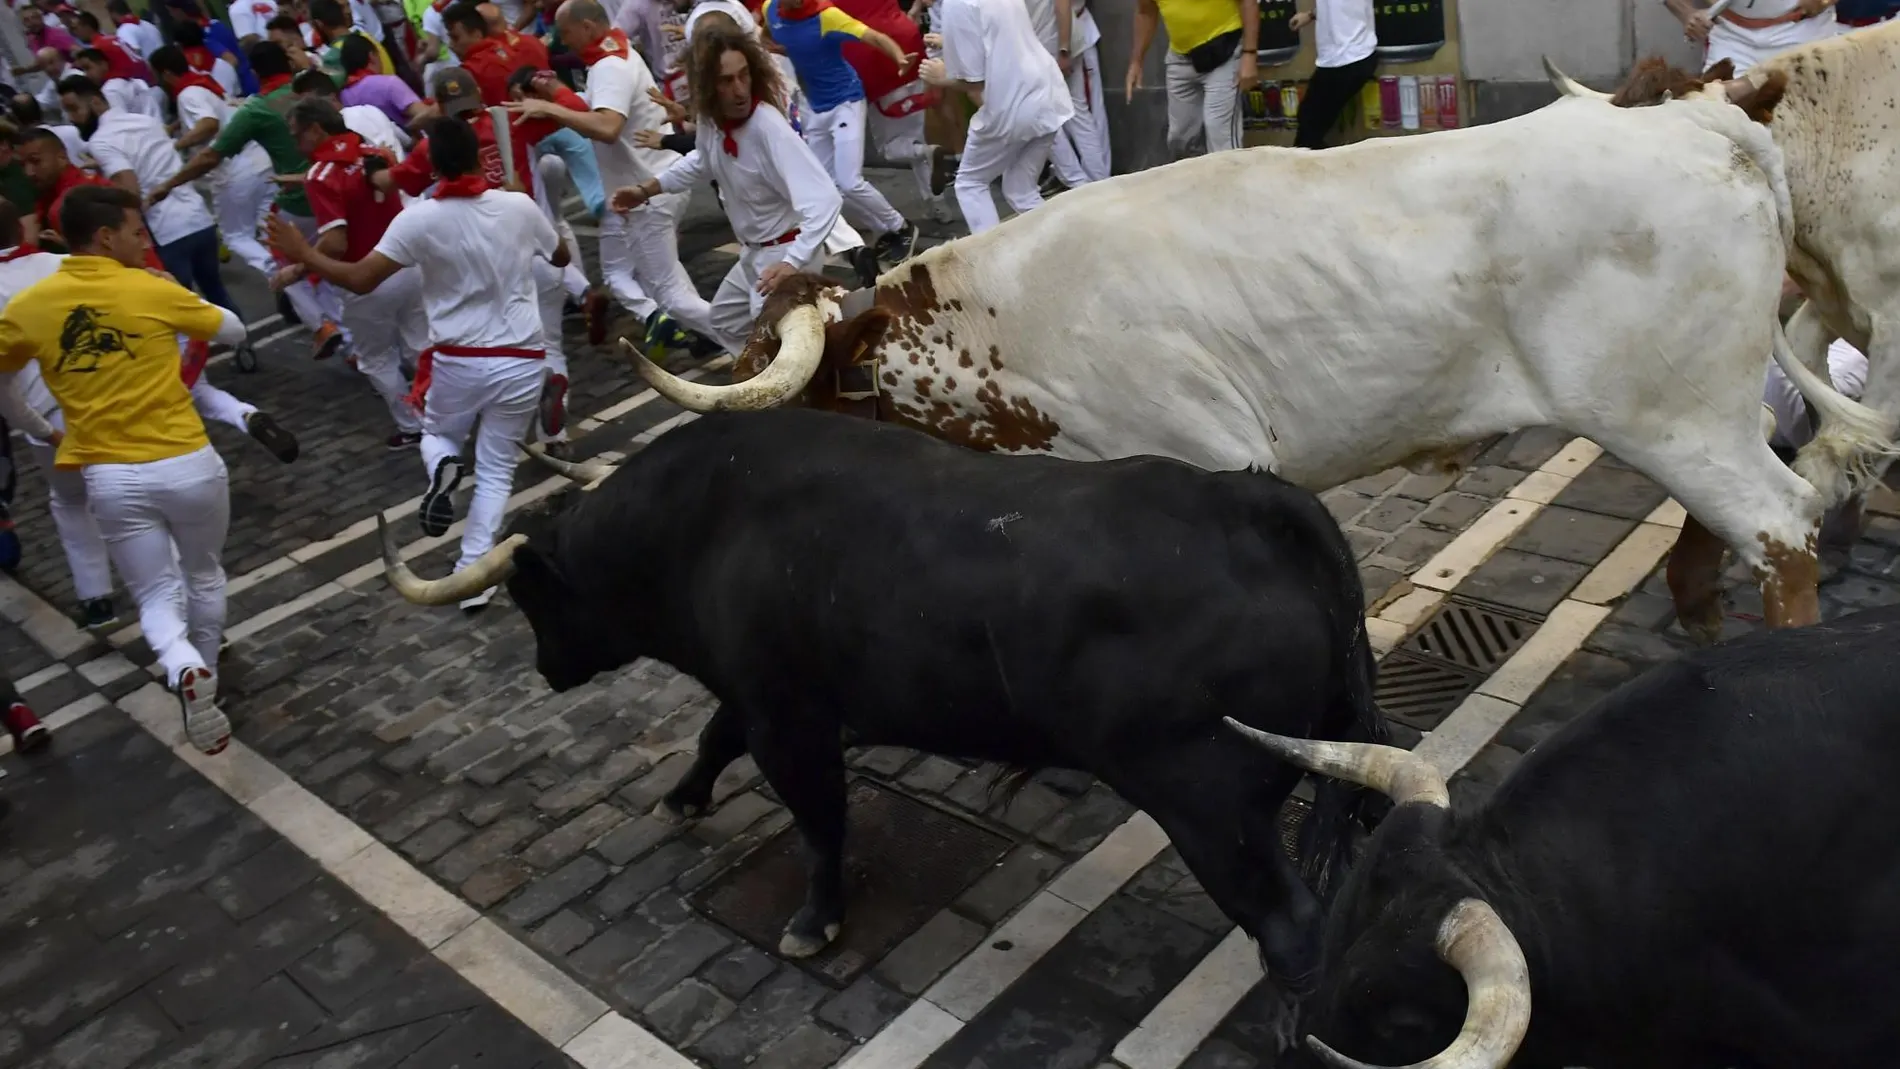 [Revellers run next to fighting bulls during the running of the bulls at the San Fermin Festival]